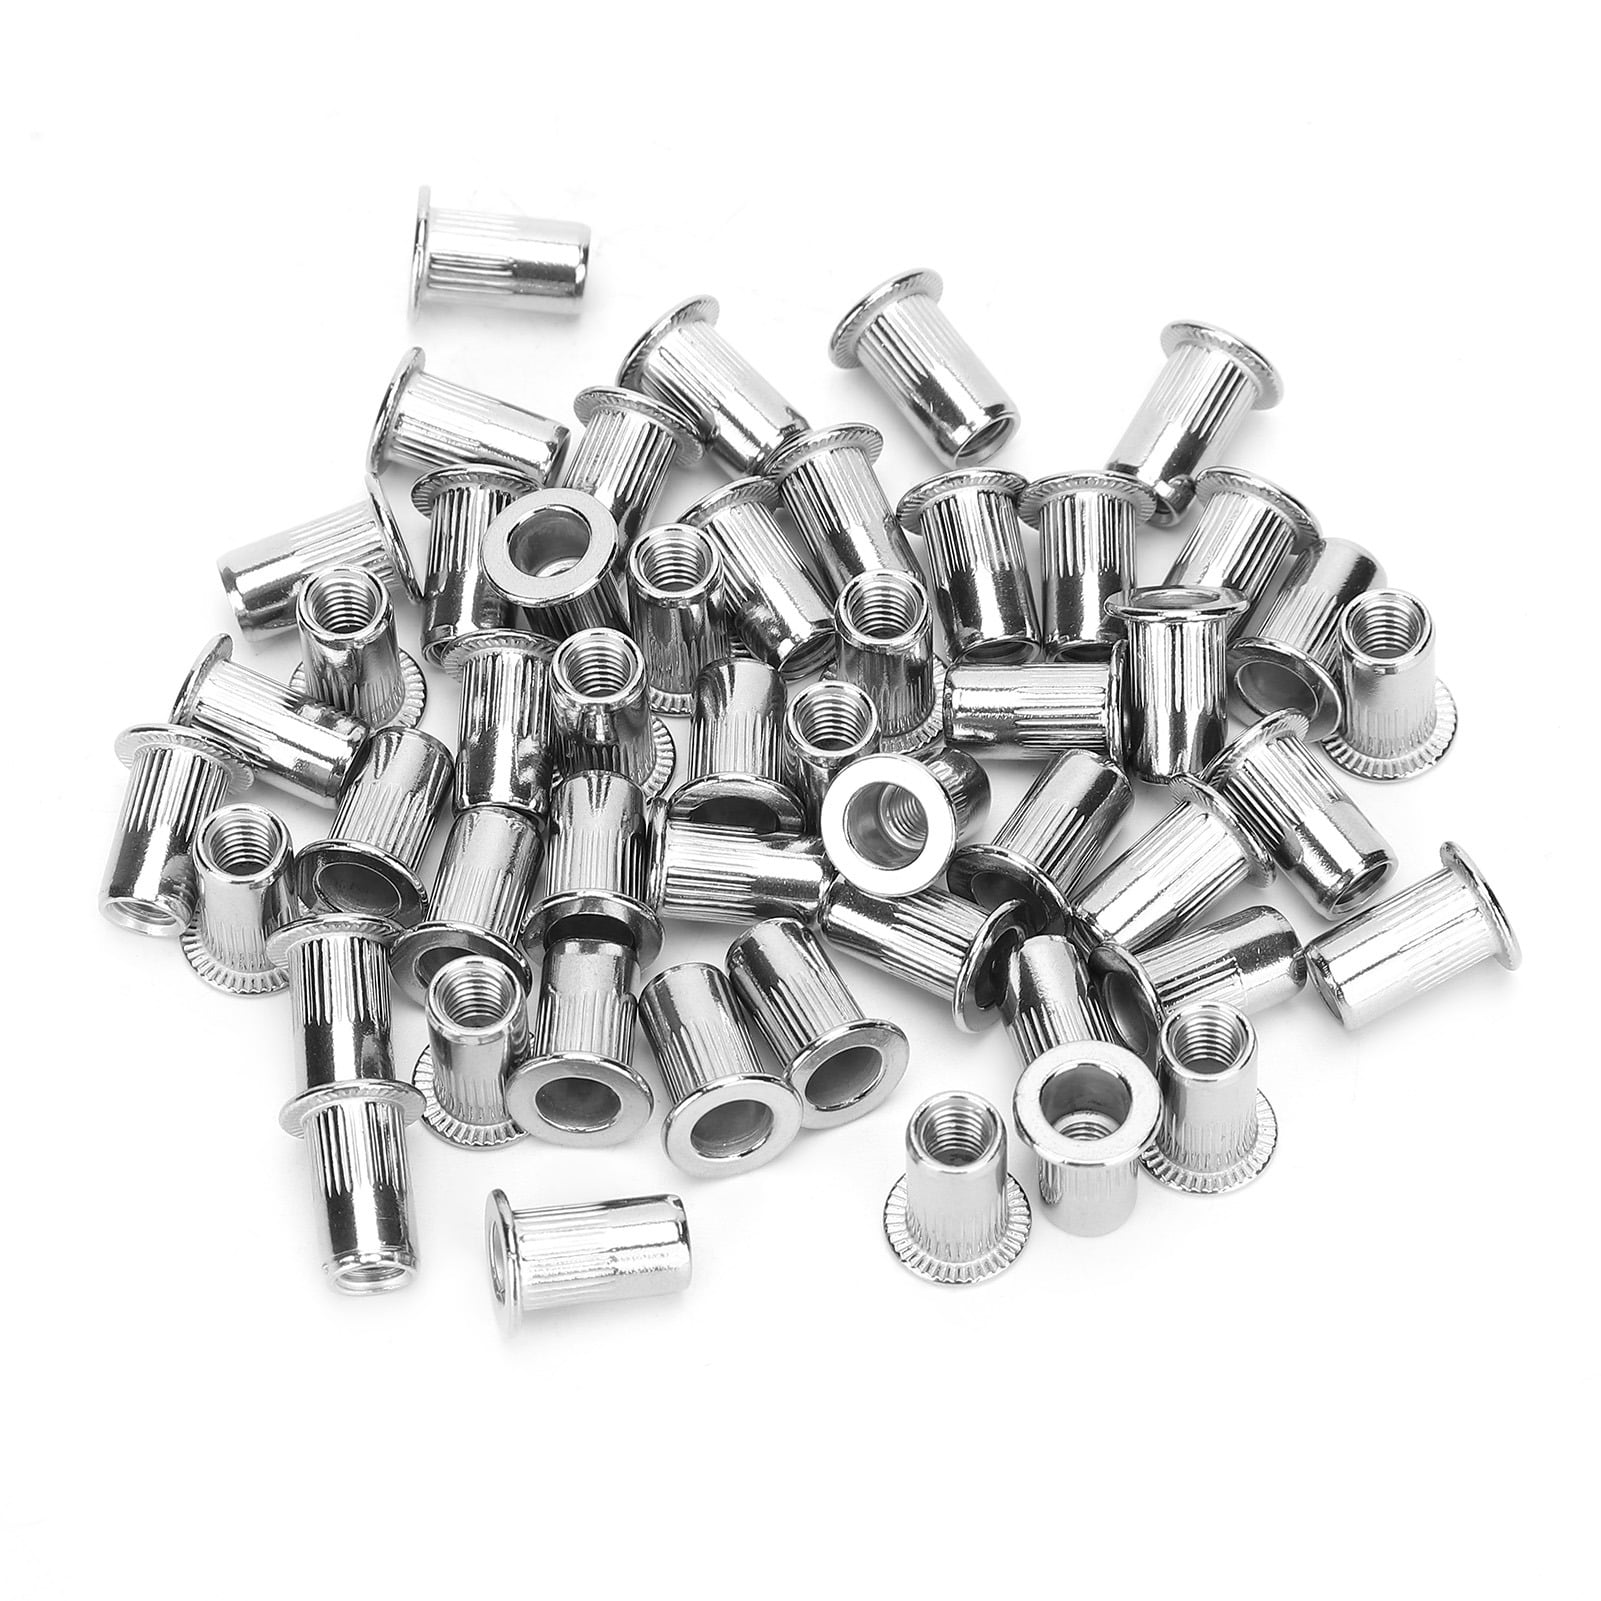 50 PCS M4 Stainless Steel Rivnut Insert Nutsert Flat Head Rivet Nut Fastener Hardware Industrial Supplies for Assembly of Electromechanical Products 